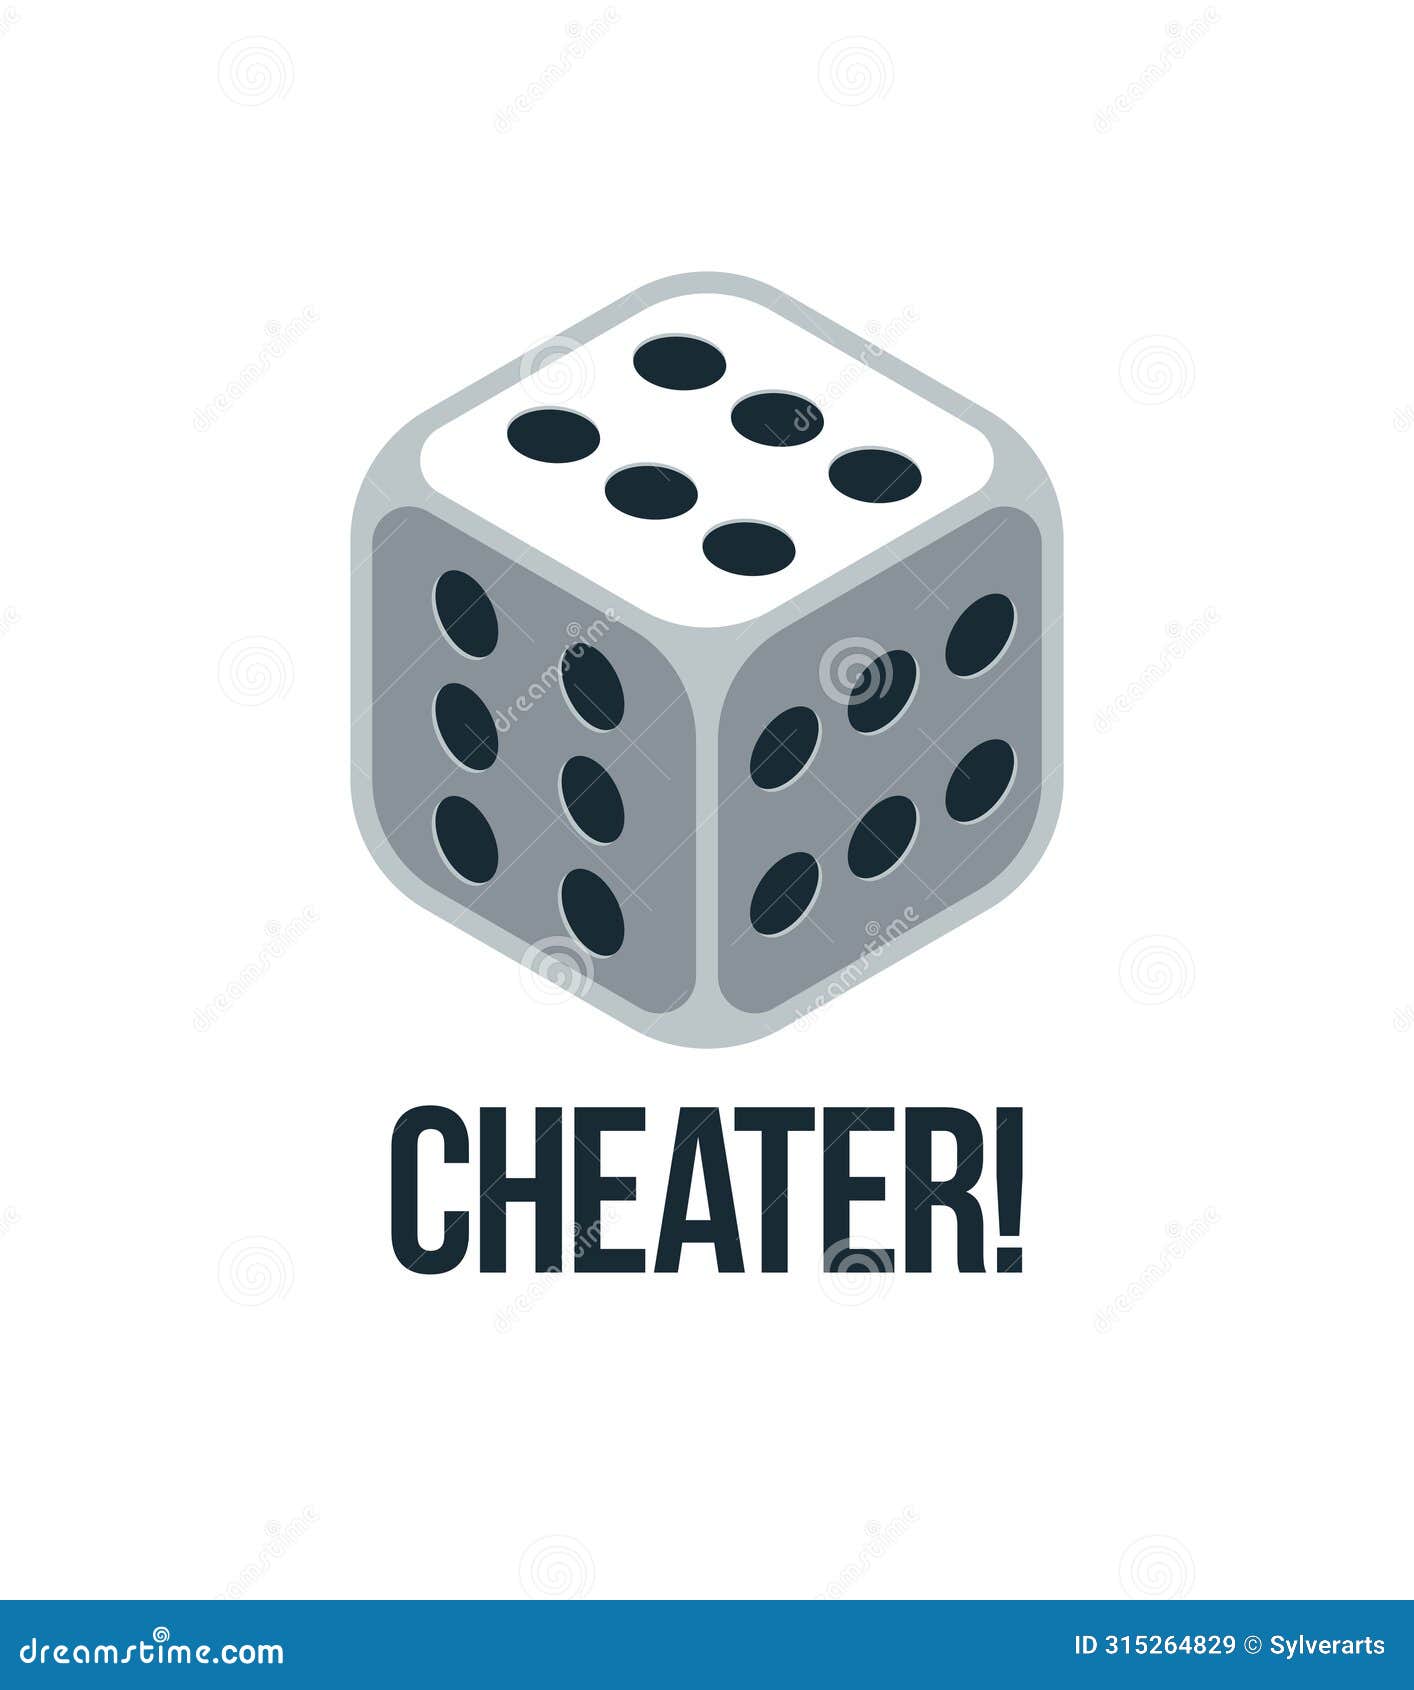 cheater concept with dice that have number 6 on every side 